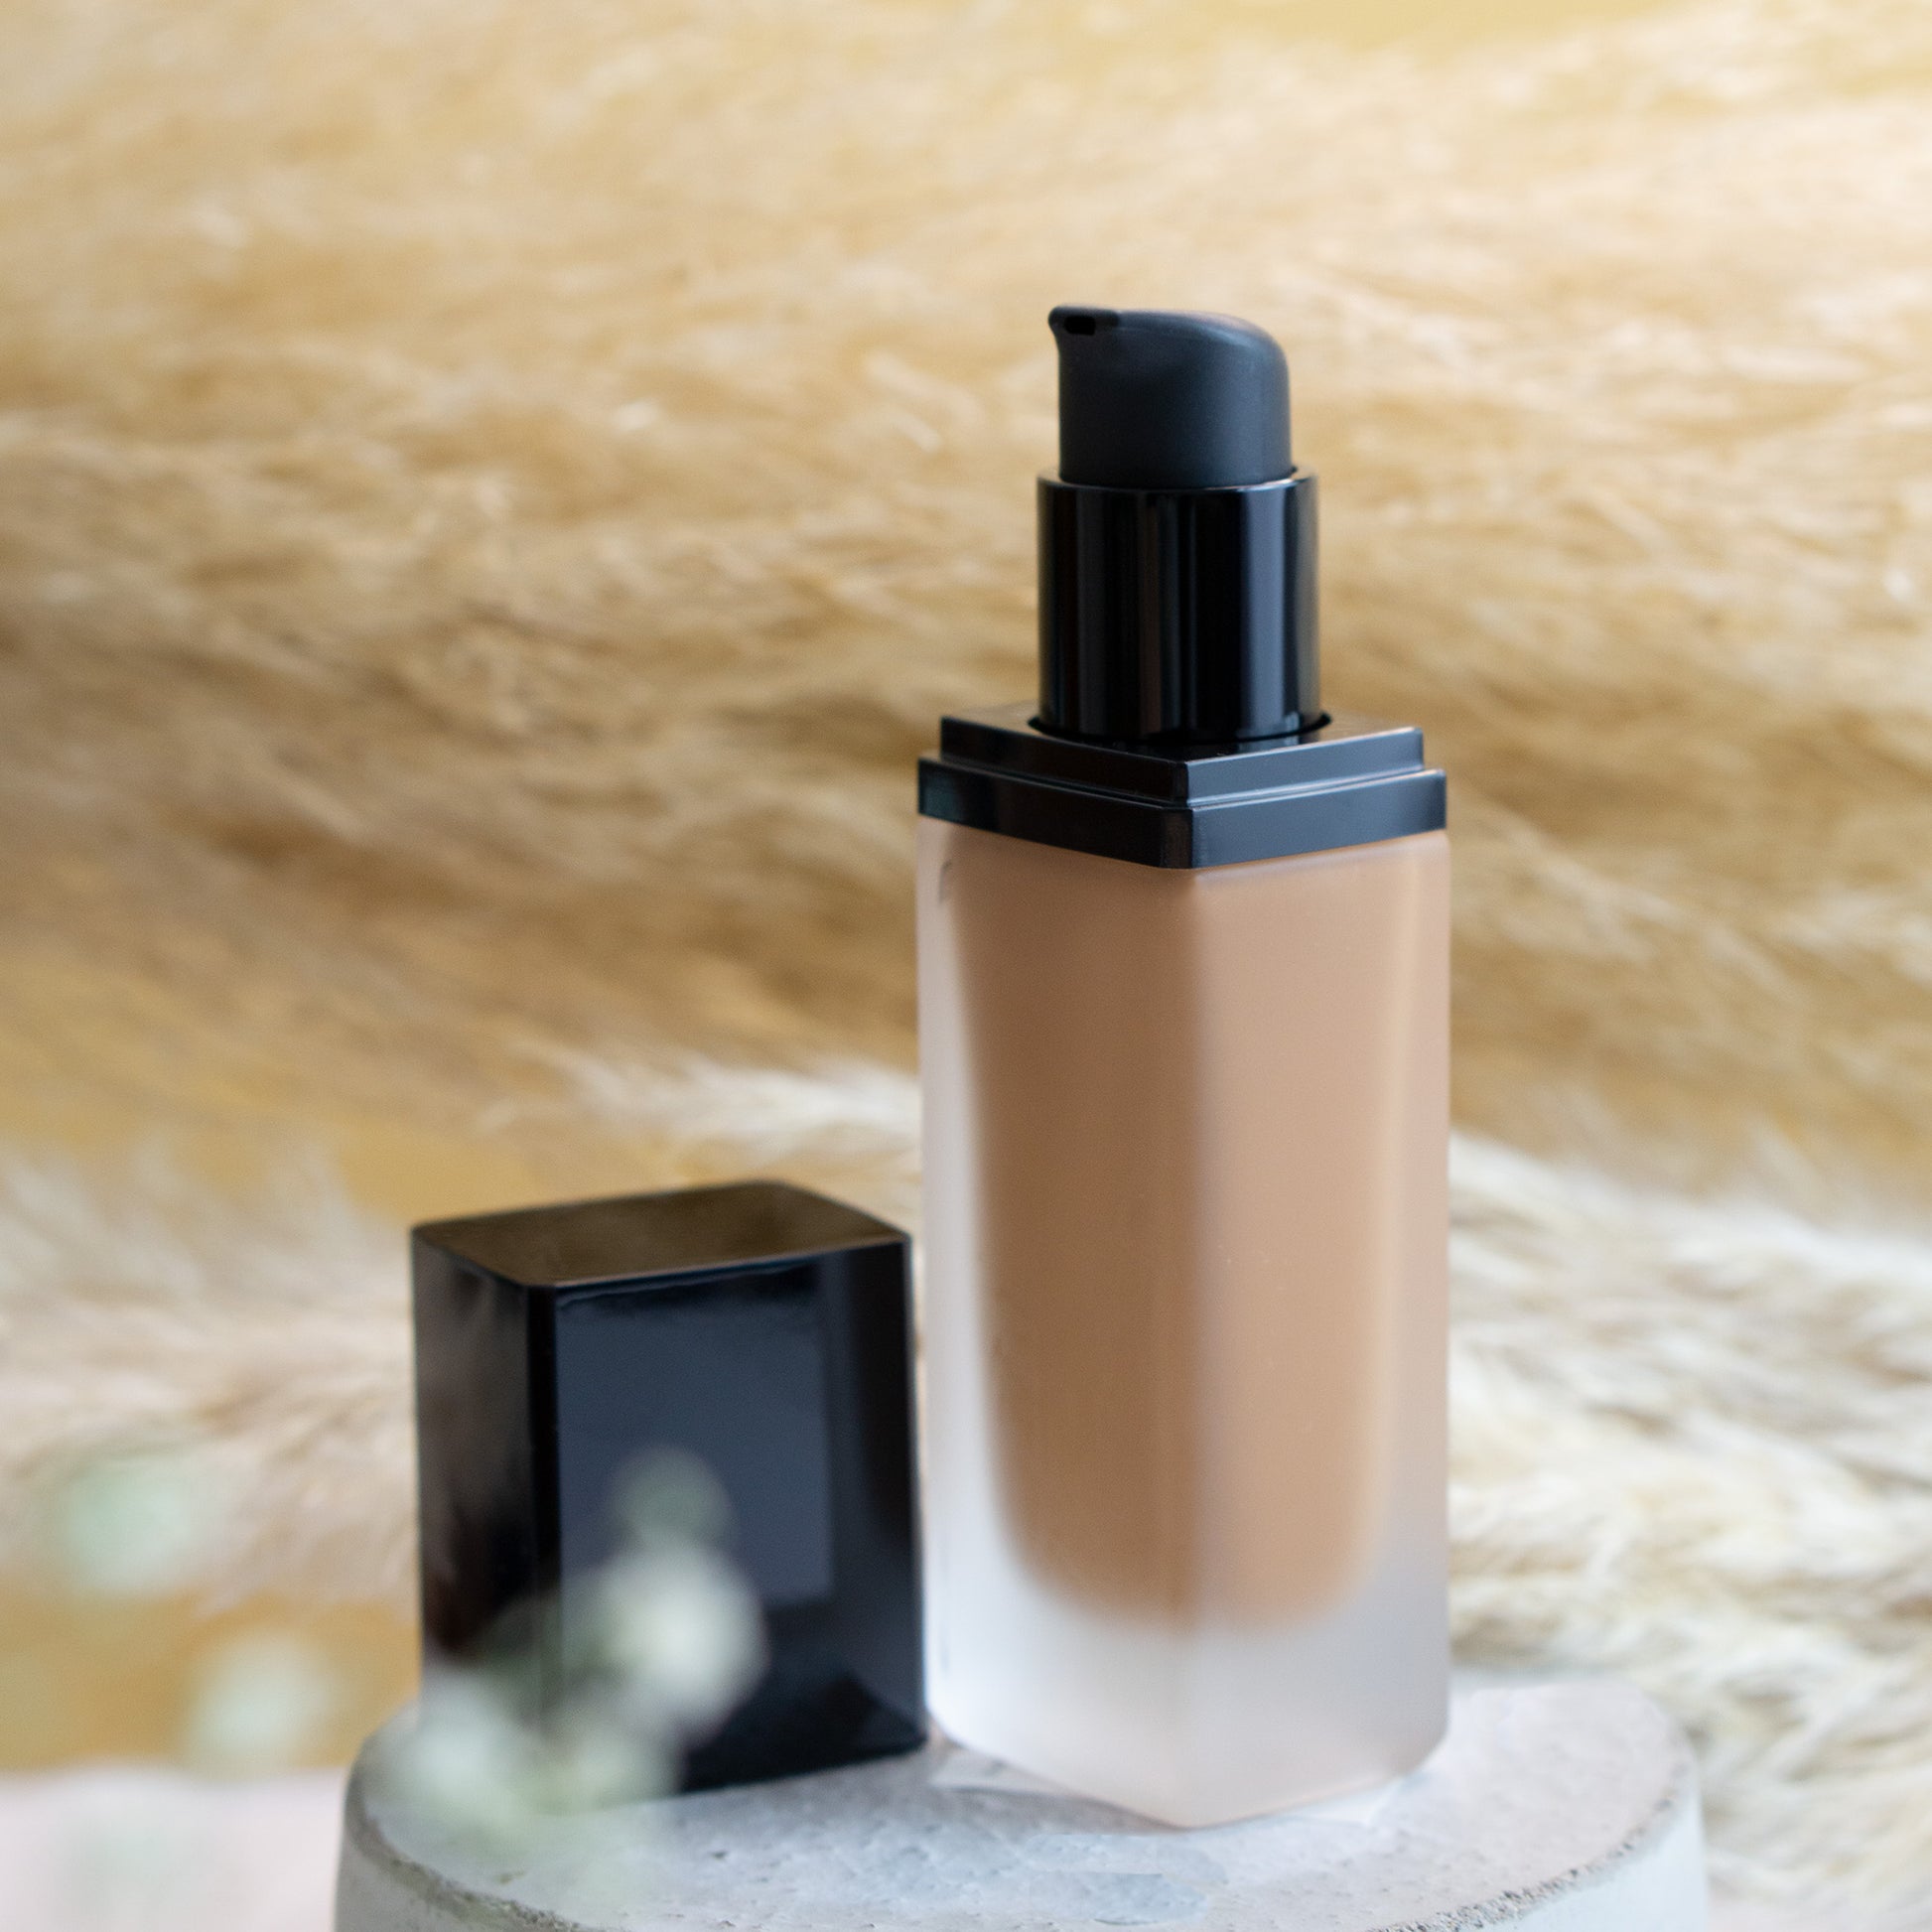 Transform your skin into a supreme canvas with Cruisin Organics Translucent Foundation. Designed to protect from environmental factors, this foundation creates a porcelain finish with a subtle yellow or pink undertone. Achieve a healthy, even complexion with a cool undertone and a youthful radiance.